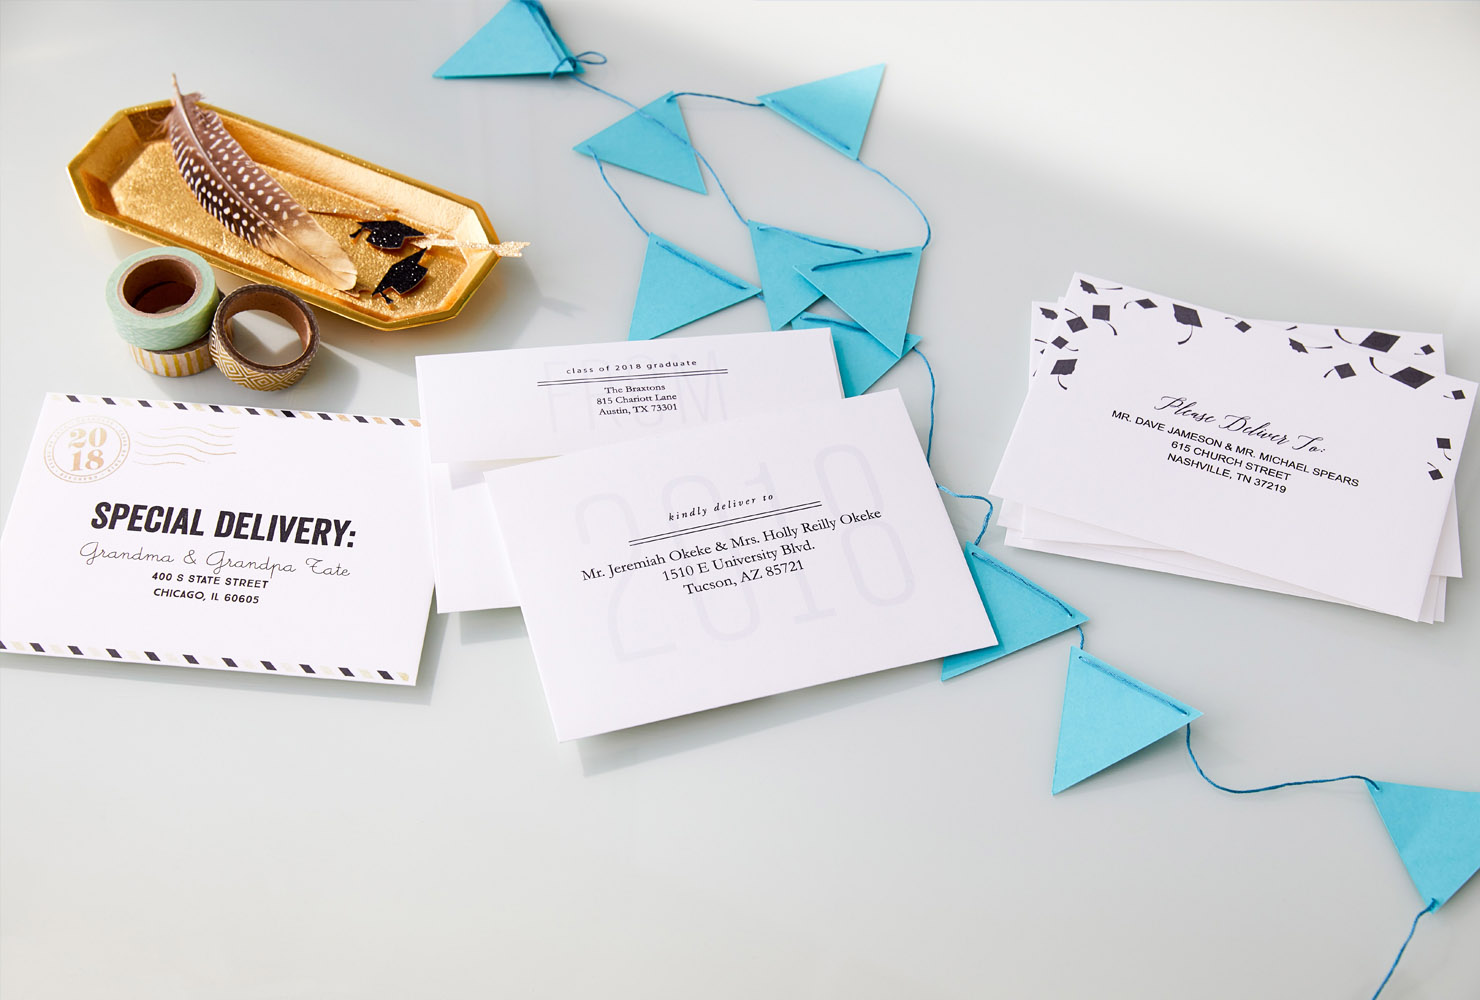 Desk of graduation cards and envelopes with blue banner